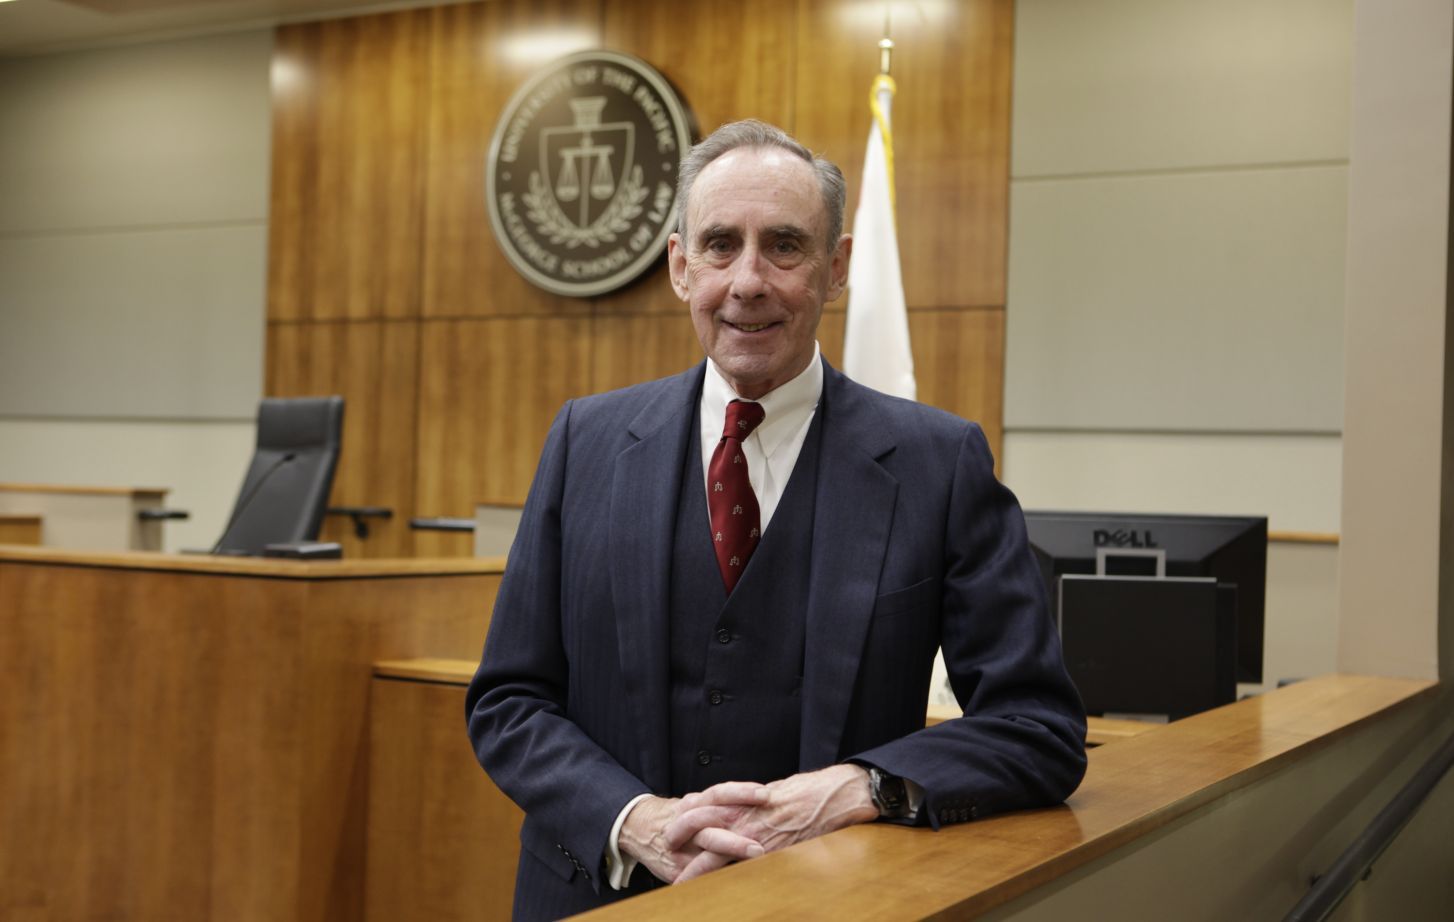 A man in a suit poses for a photo in a courtroom.